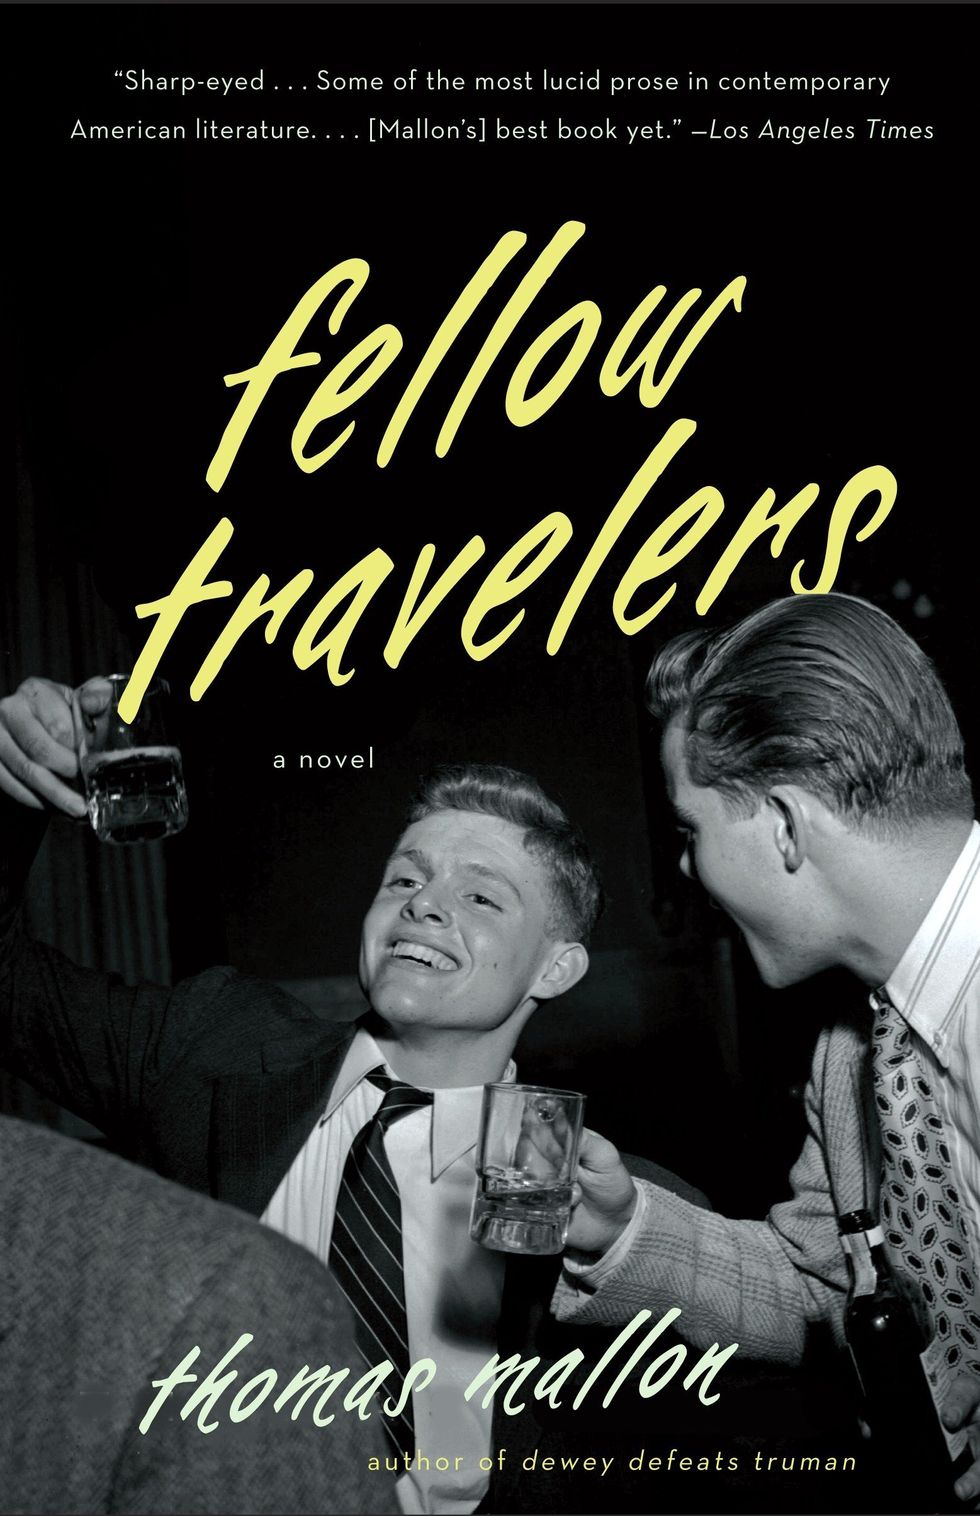 On 'Fellow Travelers,' Characters of Color Face Underexplored